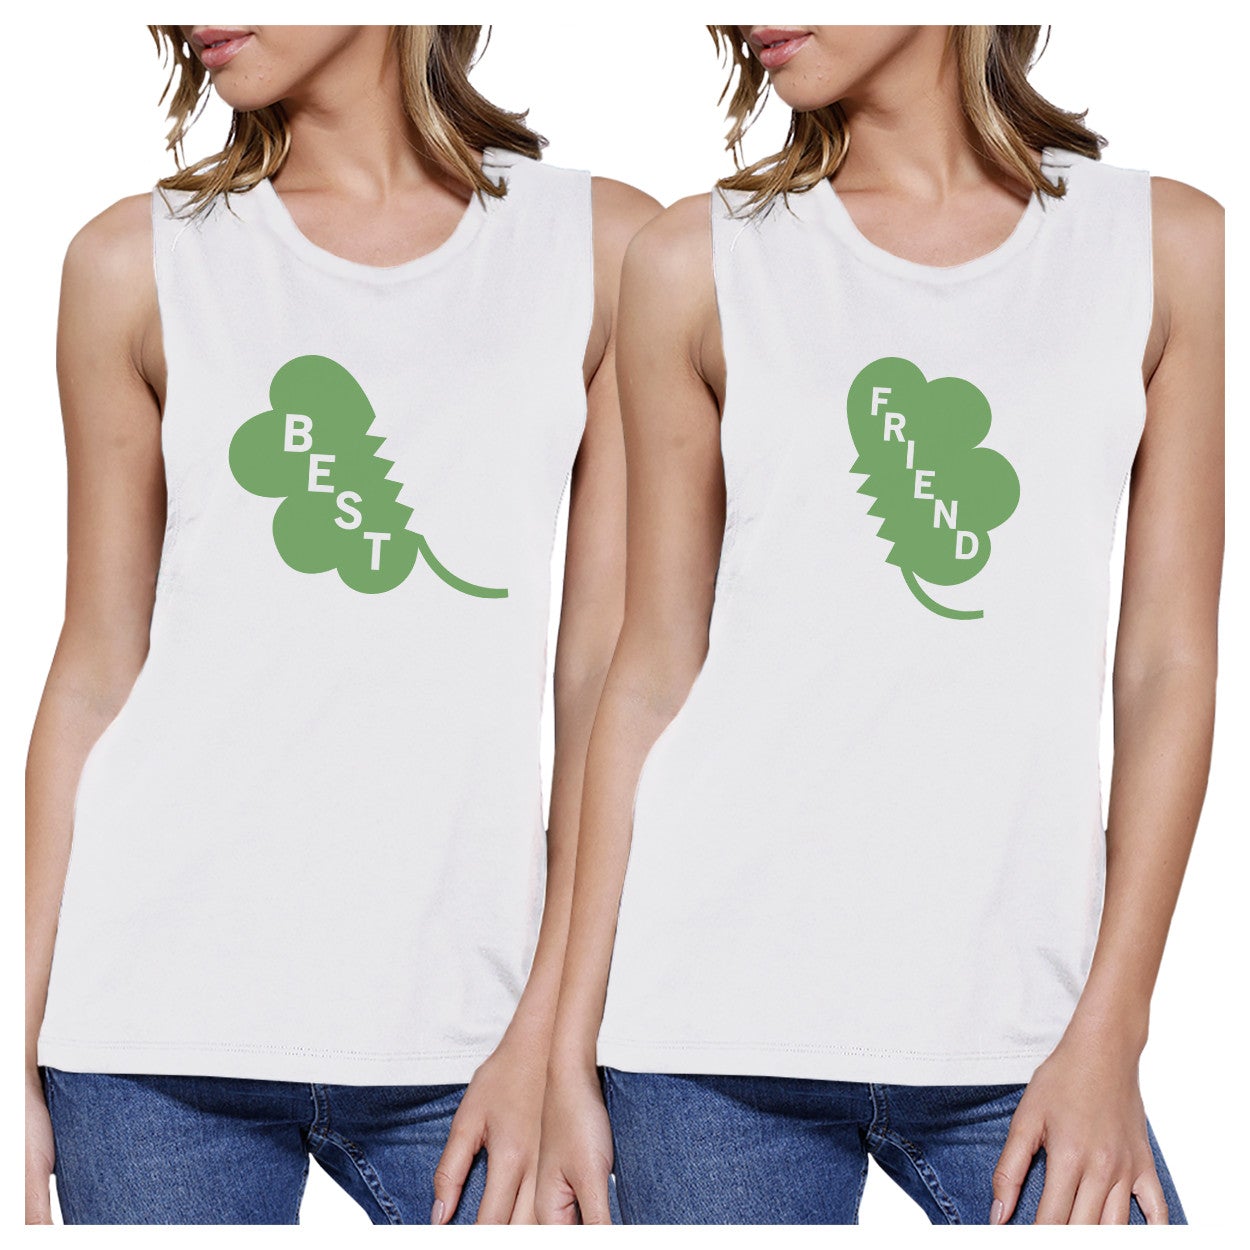 Best Friend Clover Womens White Muscle Top Funny Shirt Patricks Day - 365 In Love